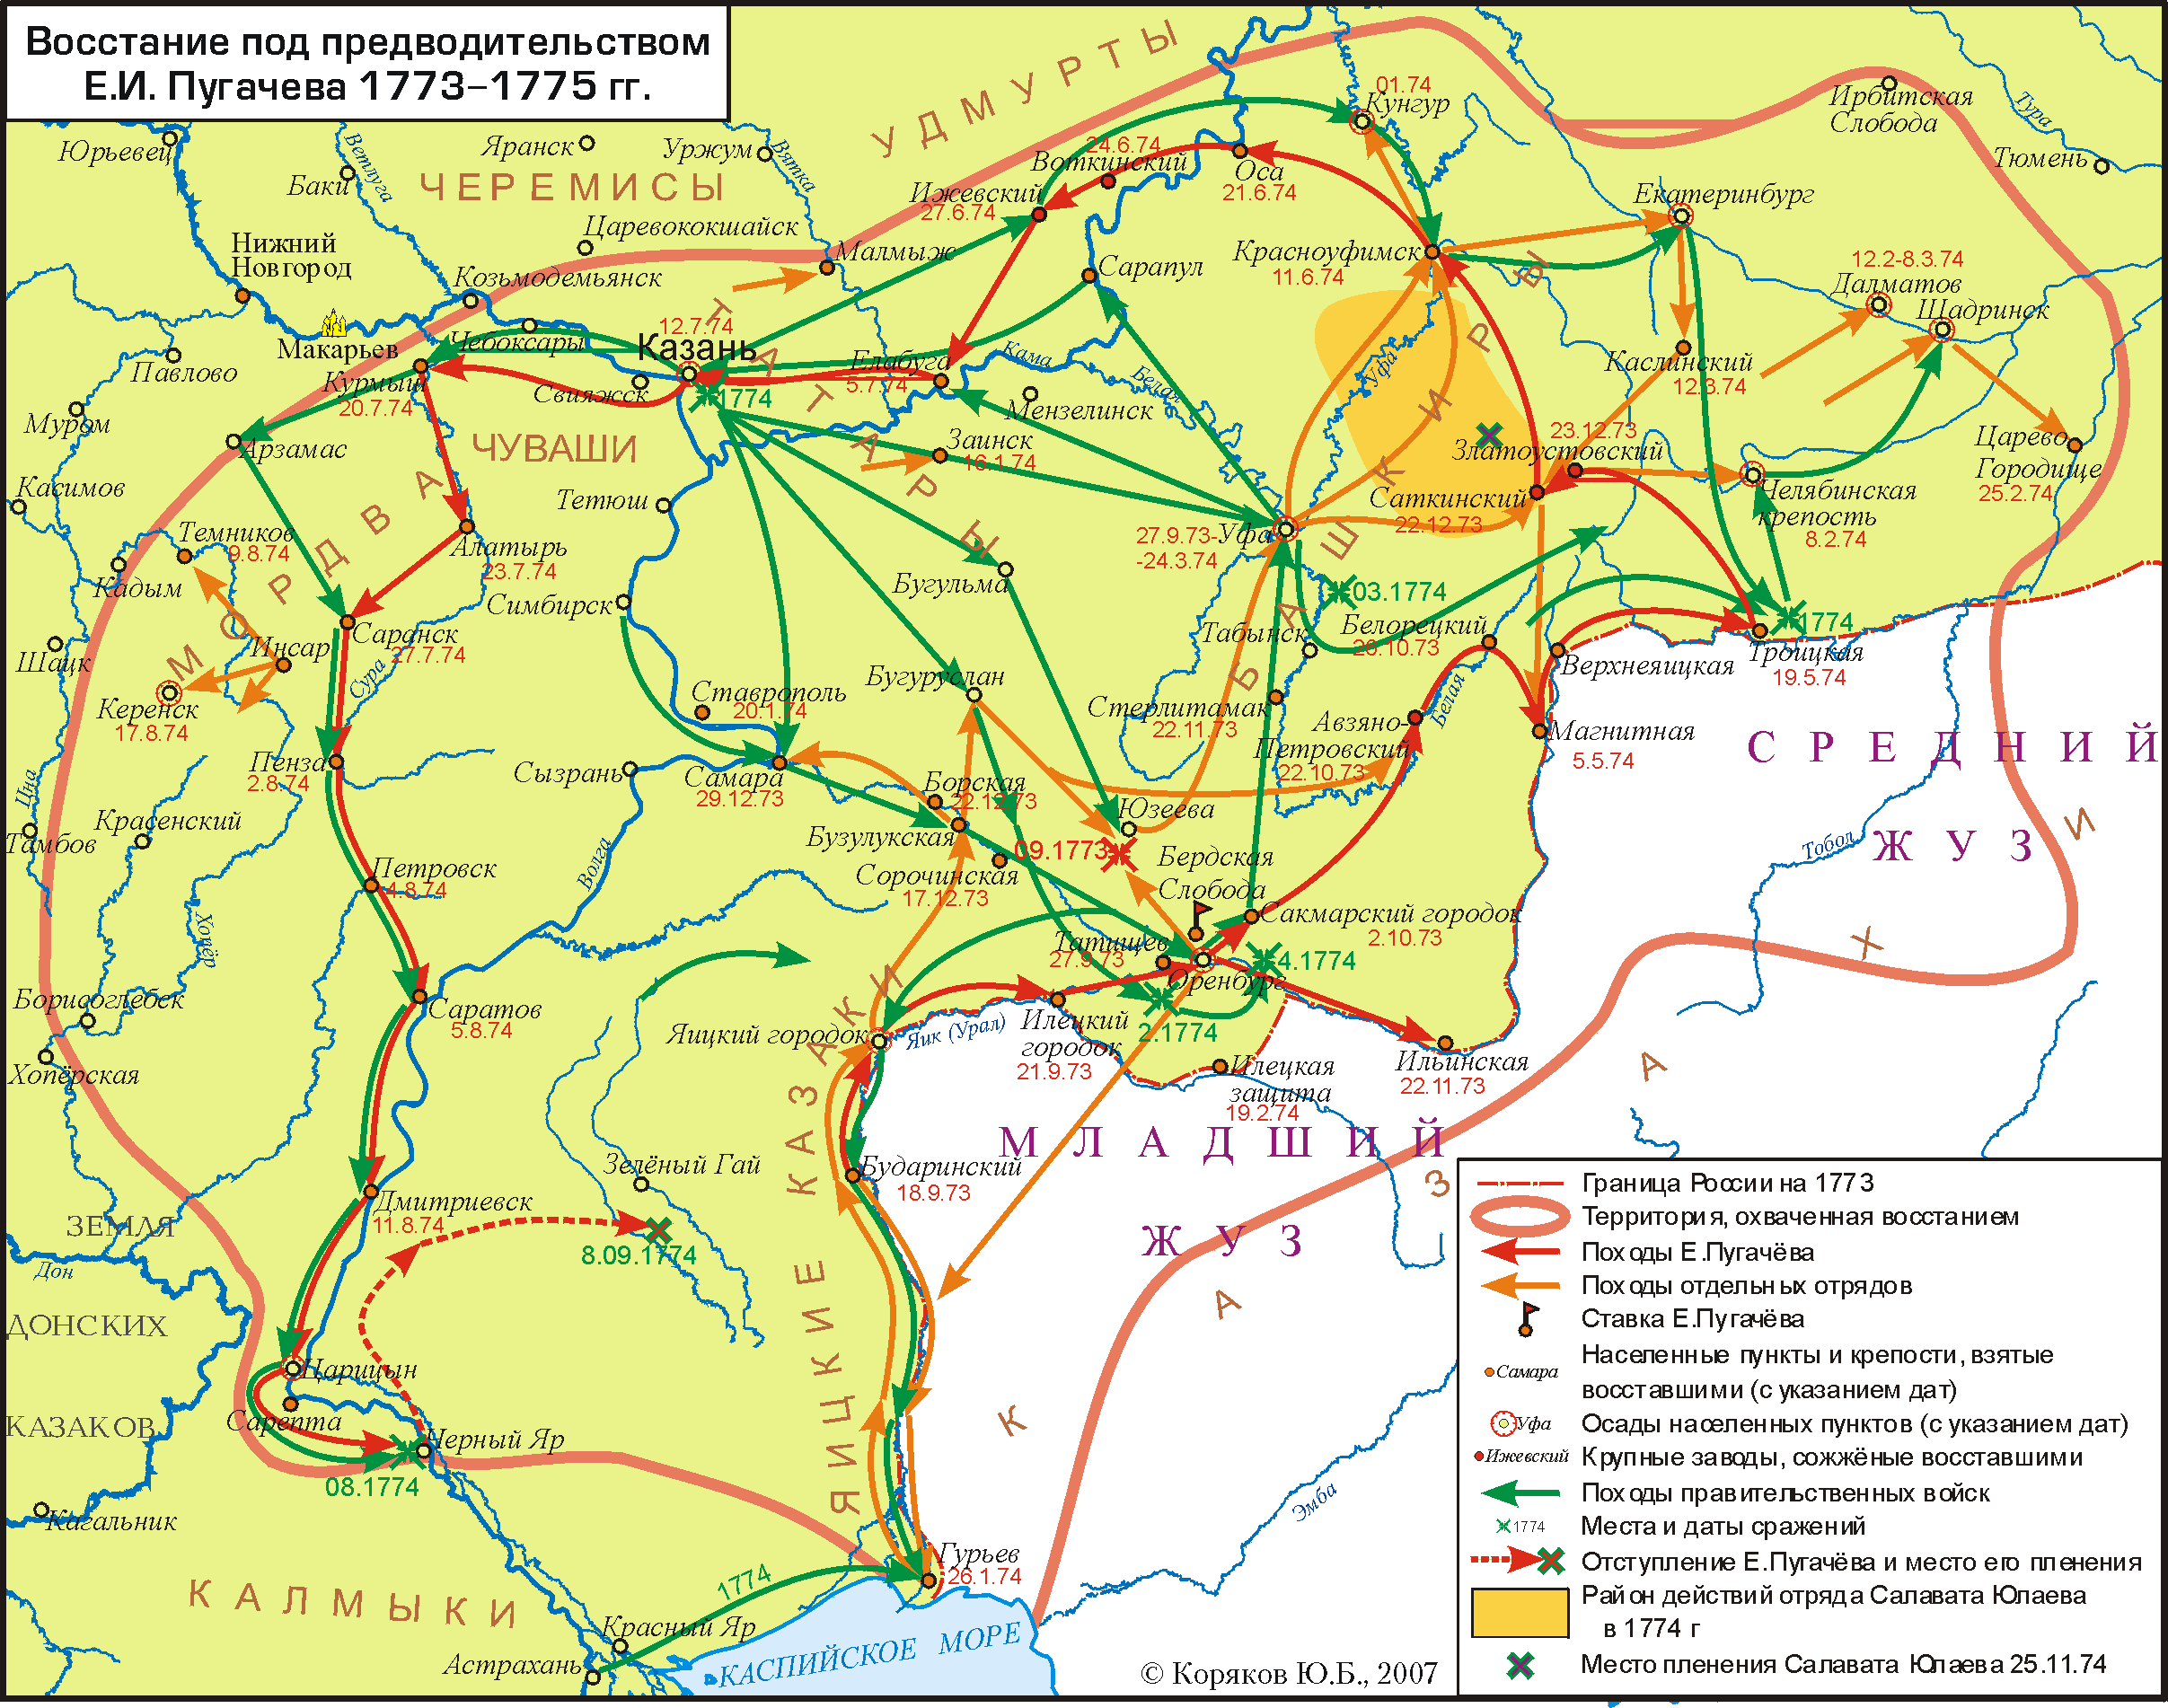 Map showing the movements of Pugachev (1773-1775). Source: unknown.